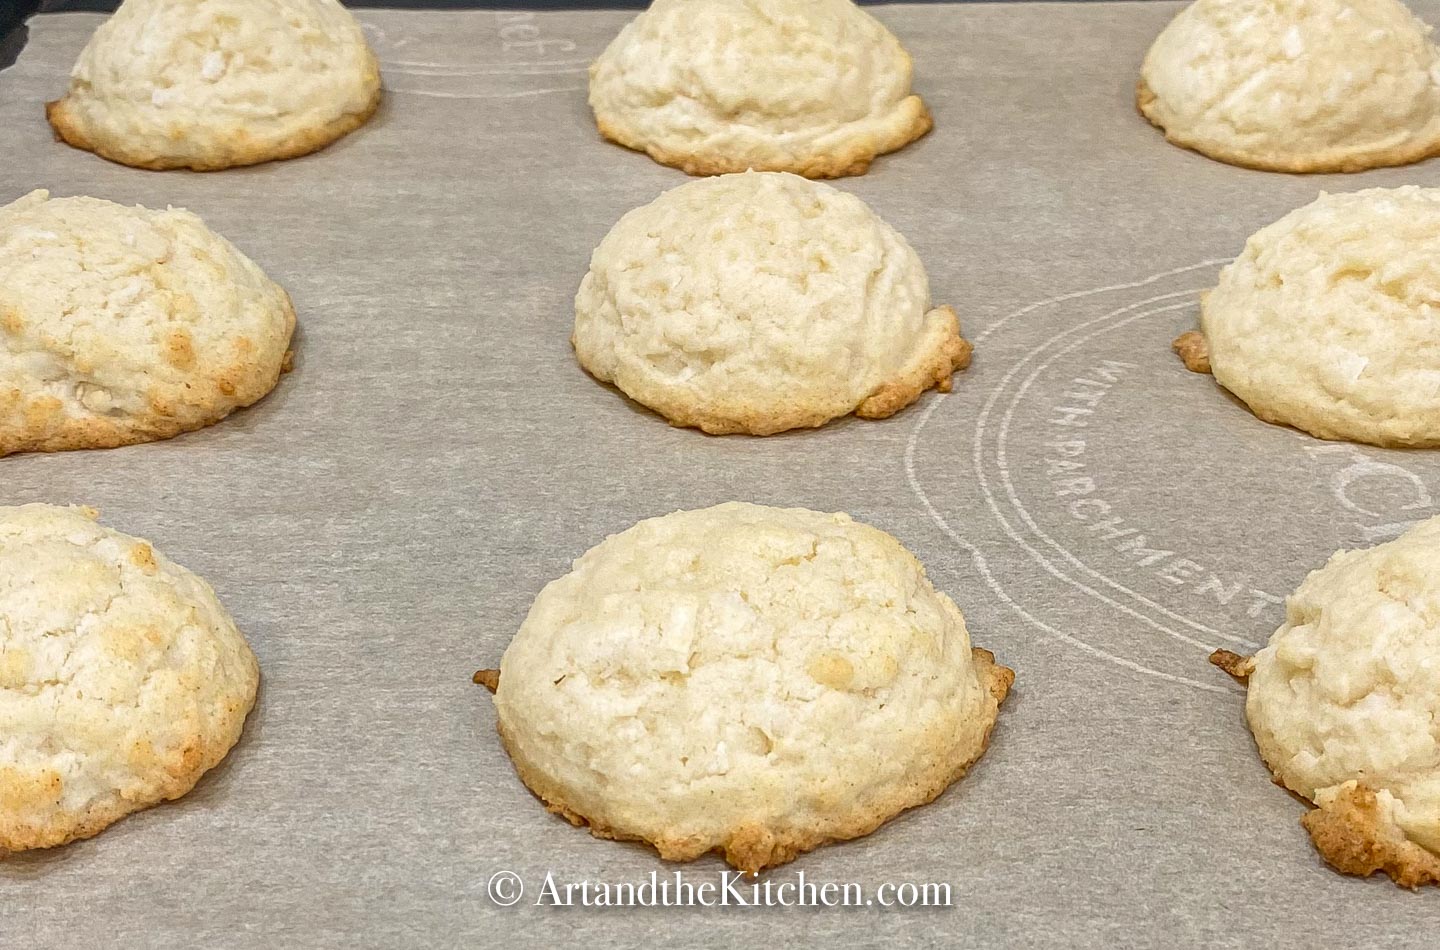 Freshly baked cookies on parchment lined baking sheet.